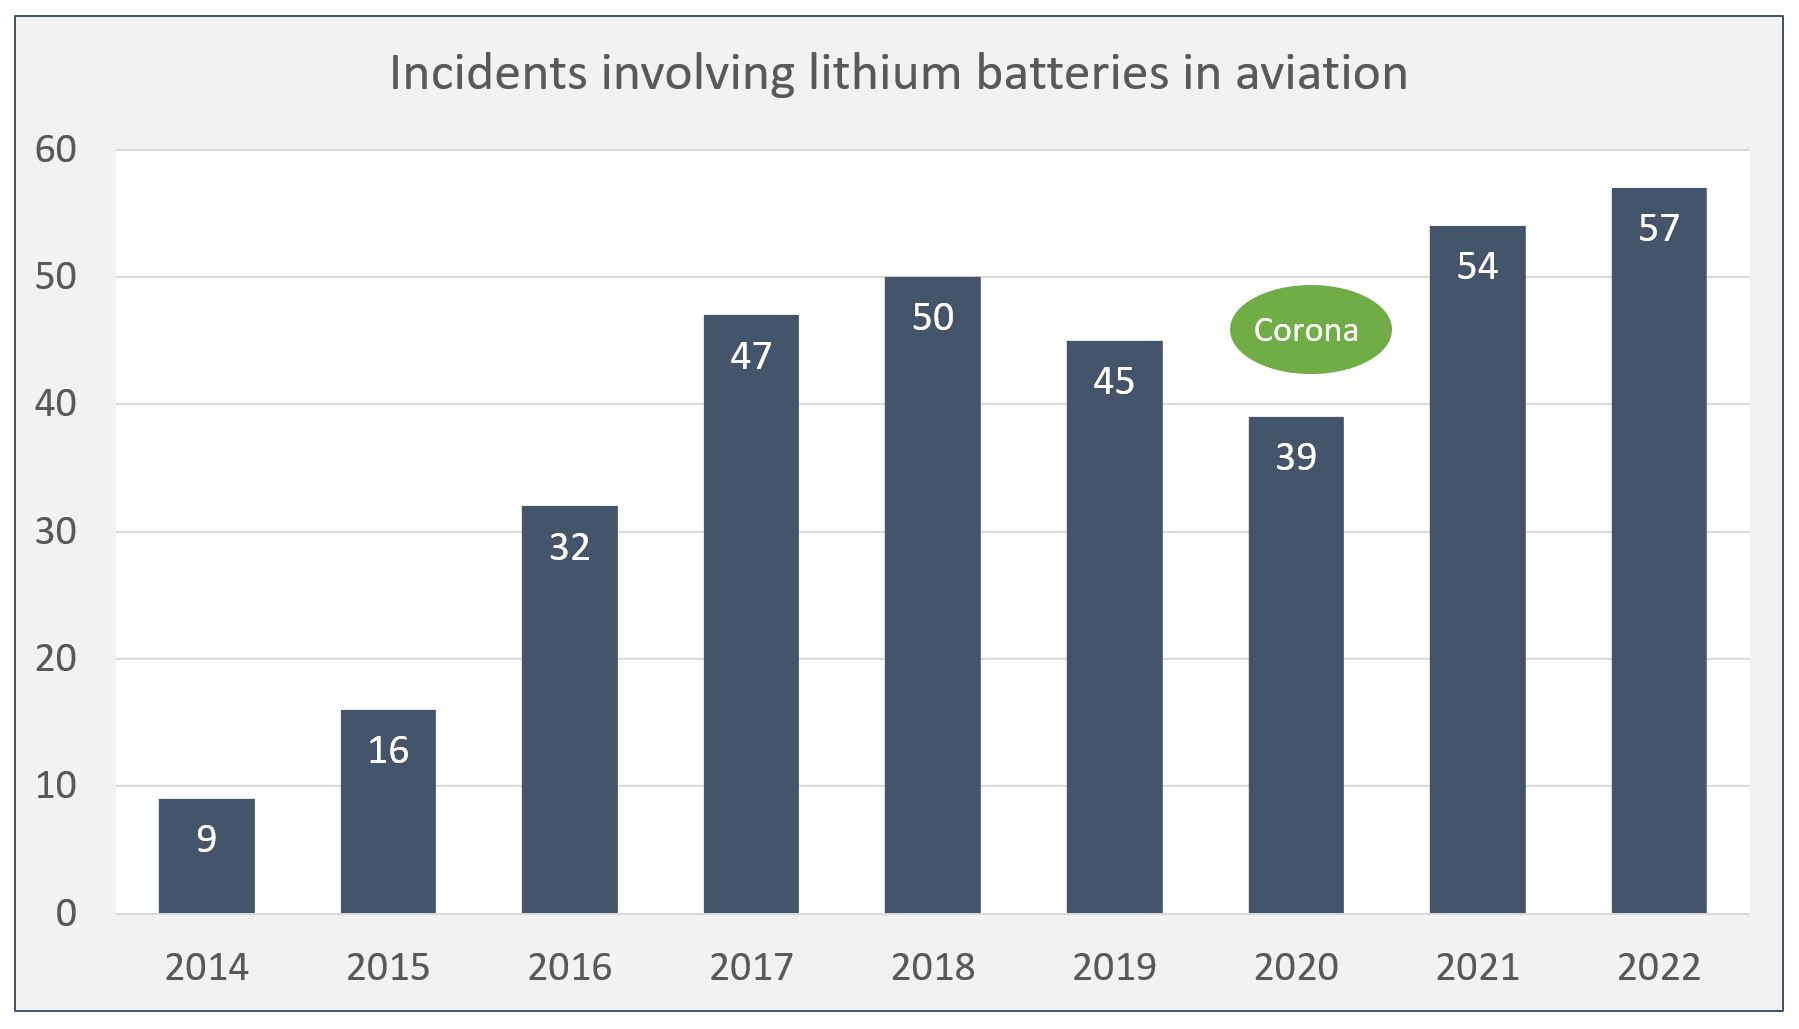 Incidents involving lithium batteries in aviation